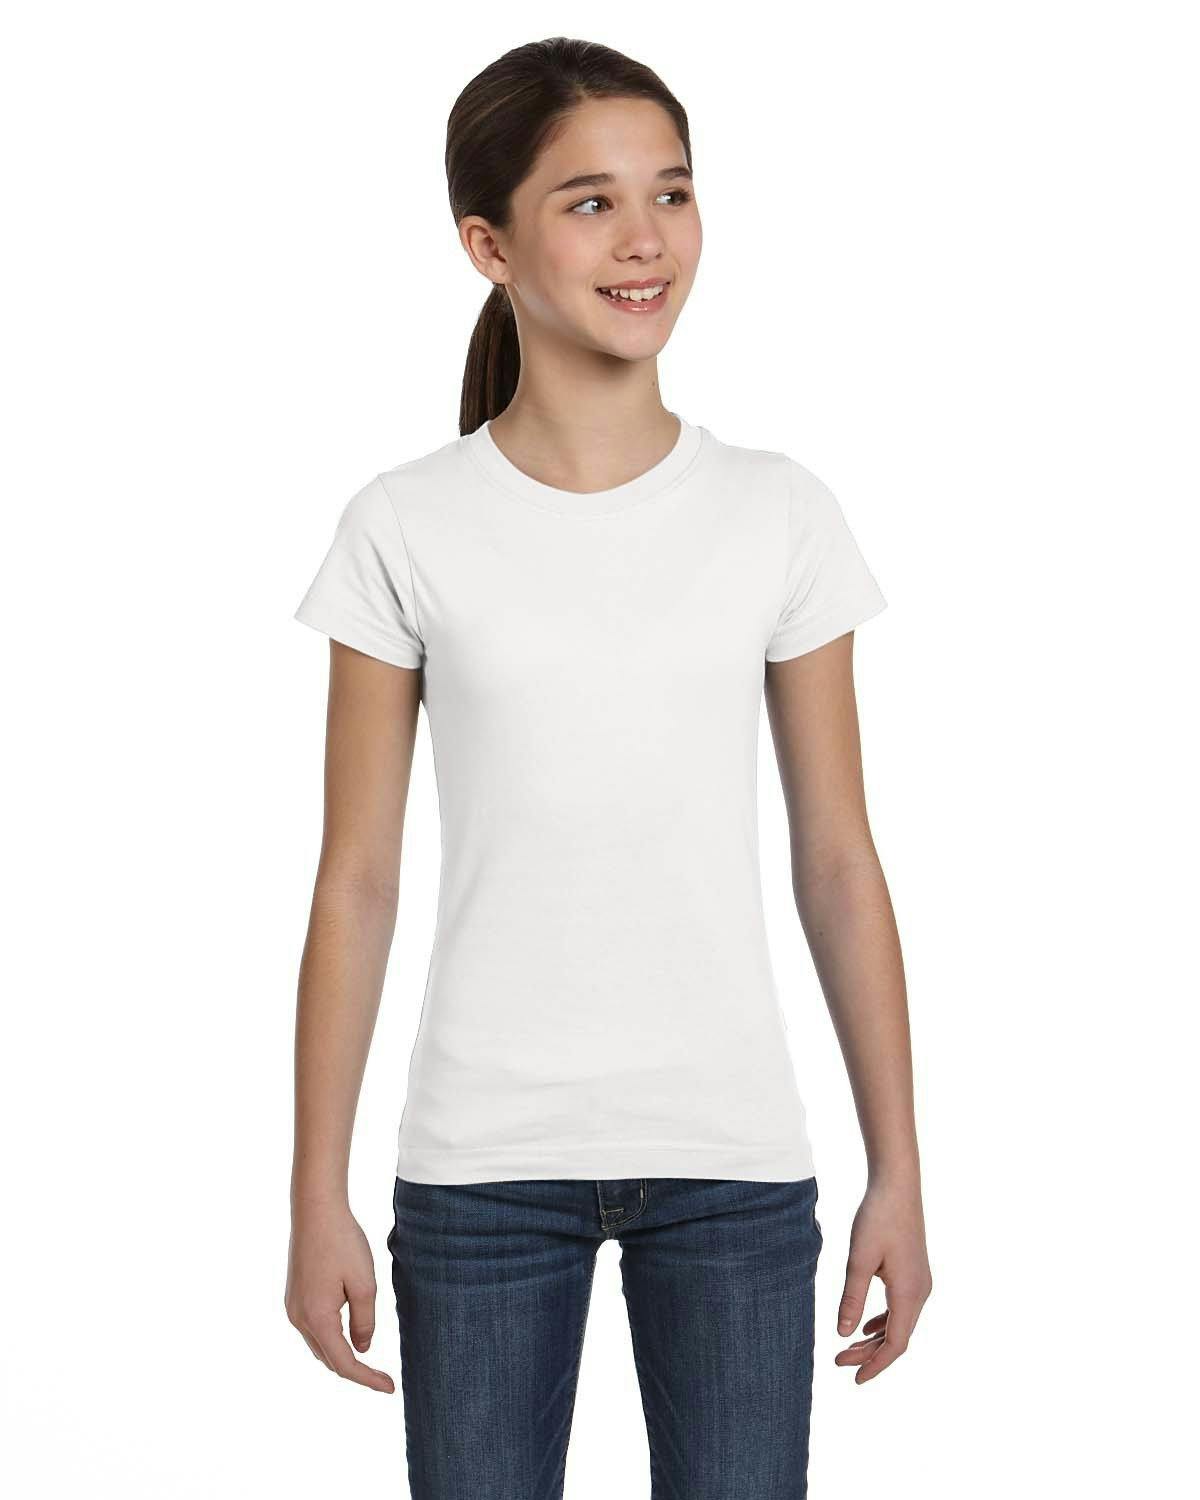 Image for Girls' Fine Jersey T-Shirt